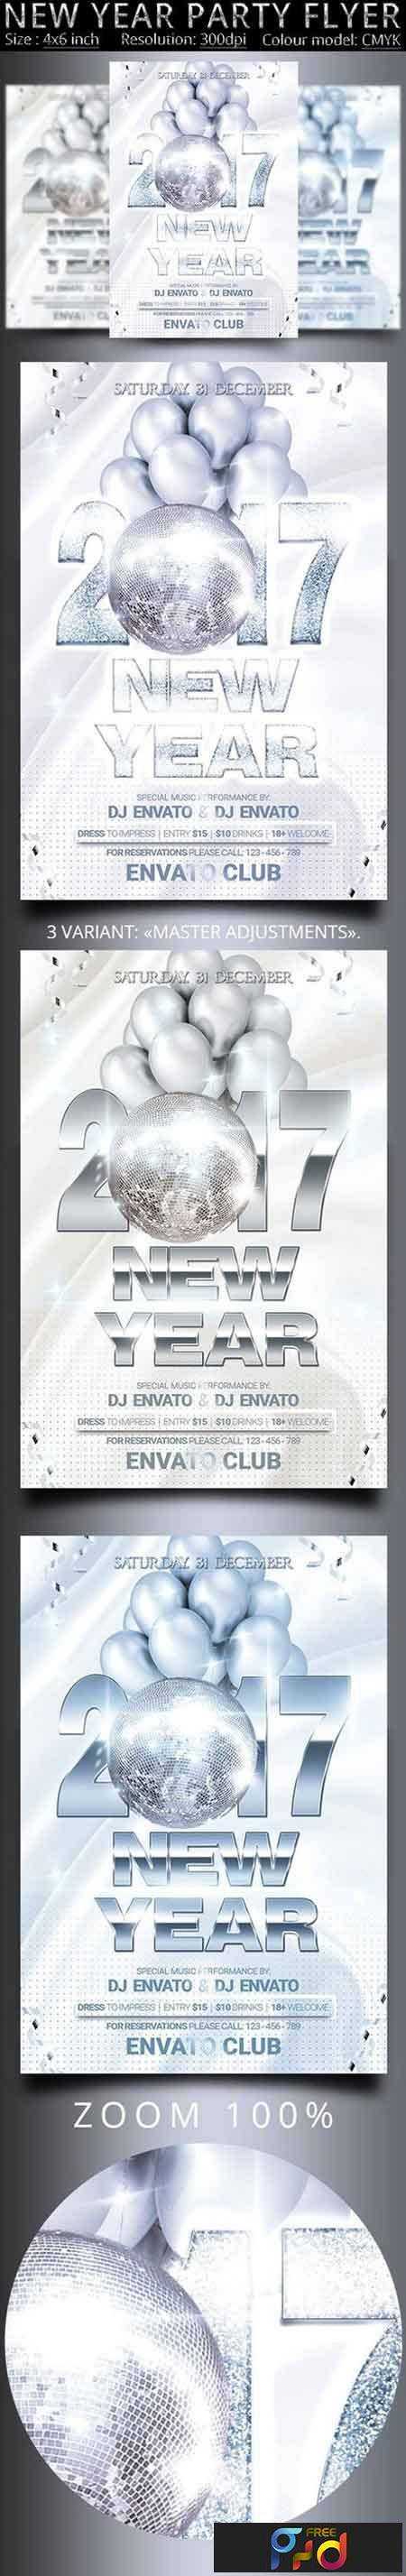 freepsdvn-com_1480990395_new-year-party-flyer-1036577